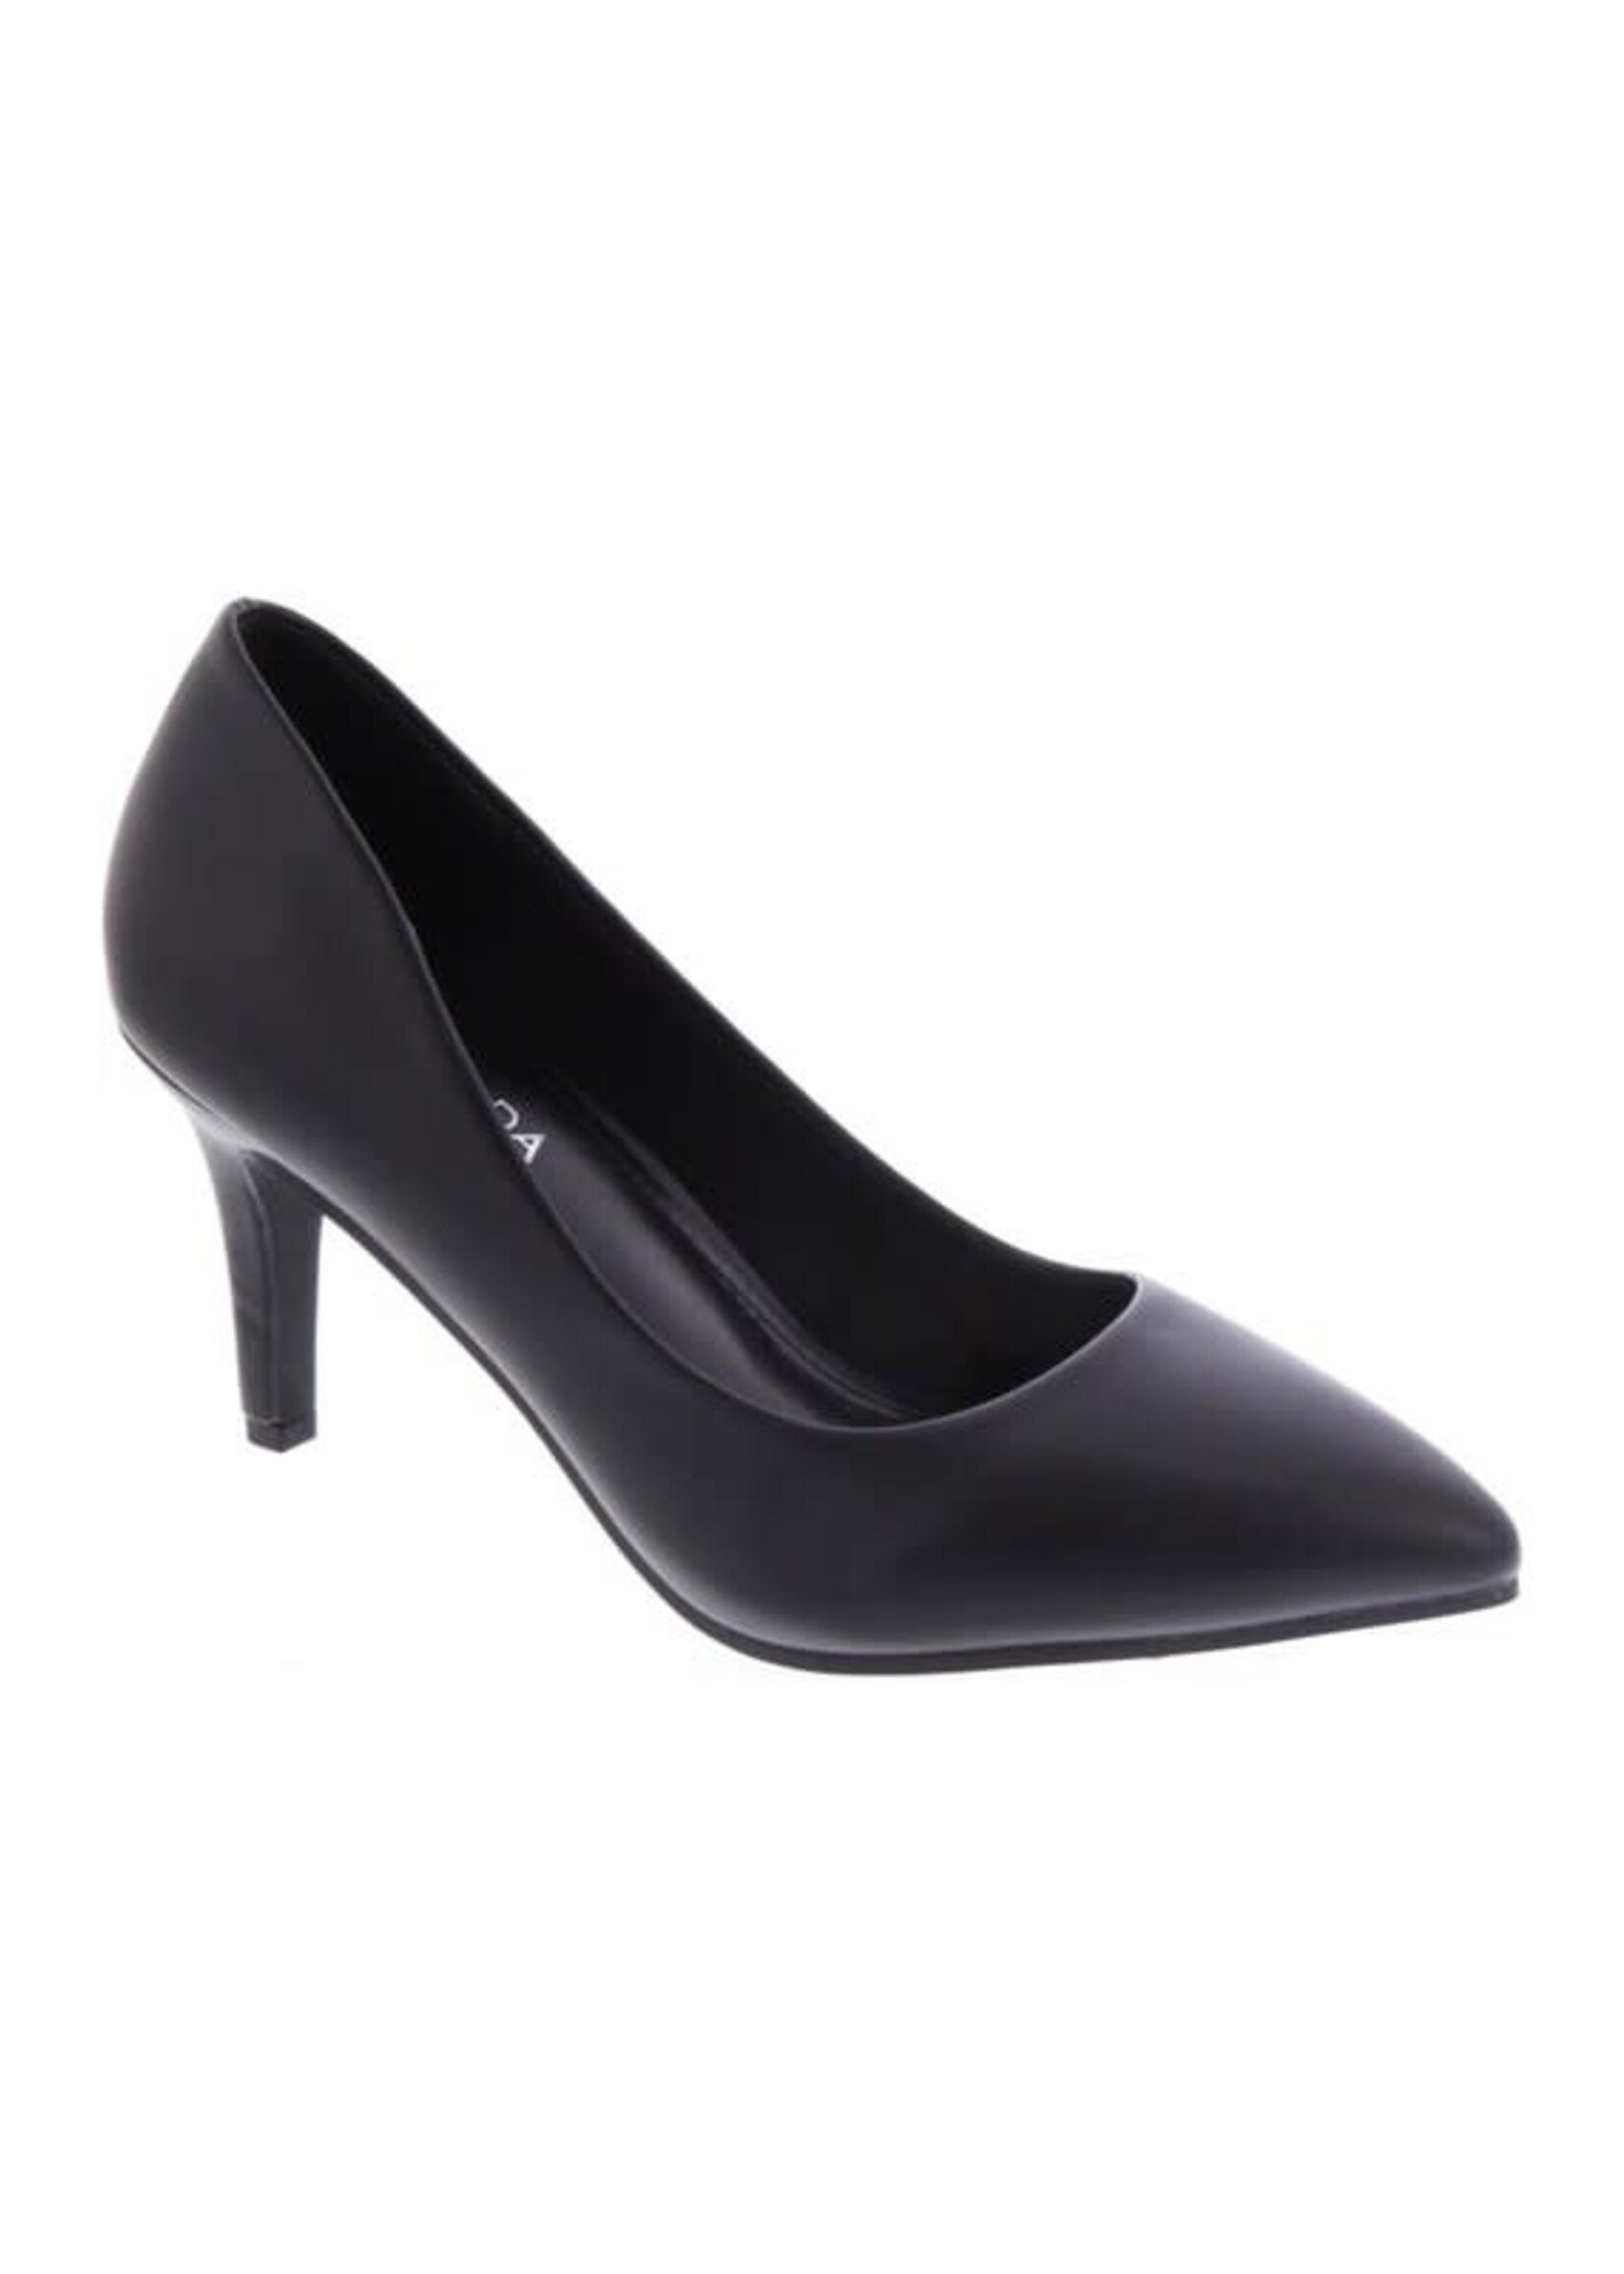 LSSTUESDAY - CLASSIC POINTED TOE STILETTO